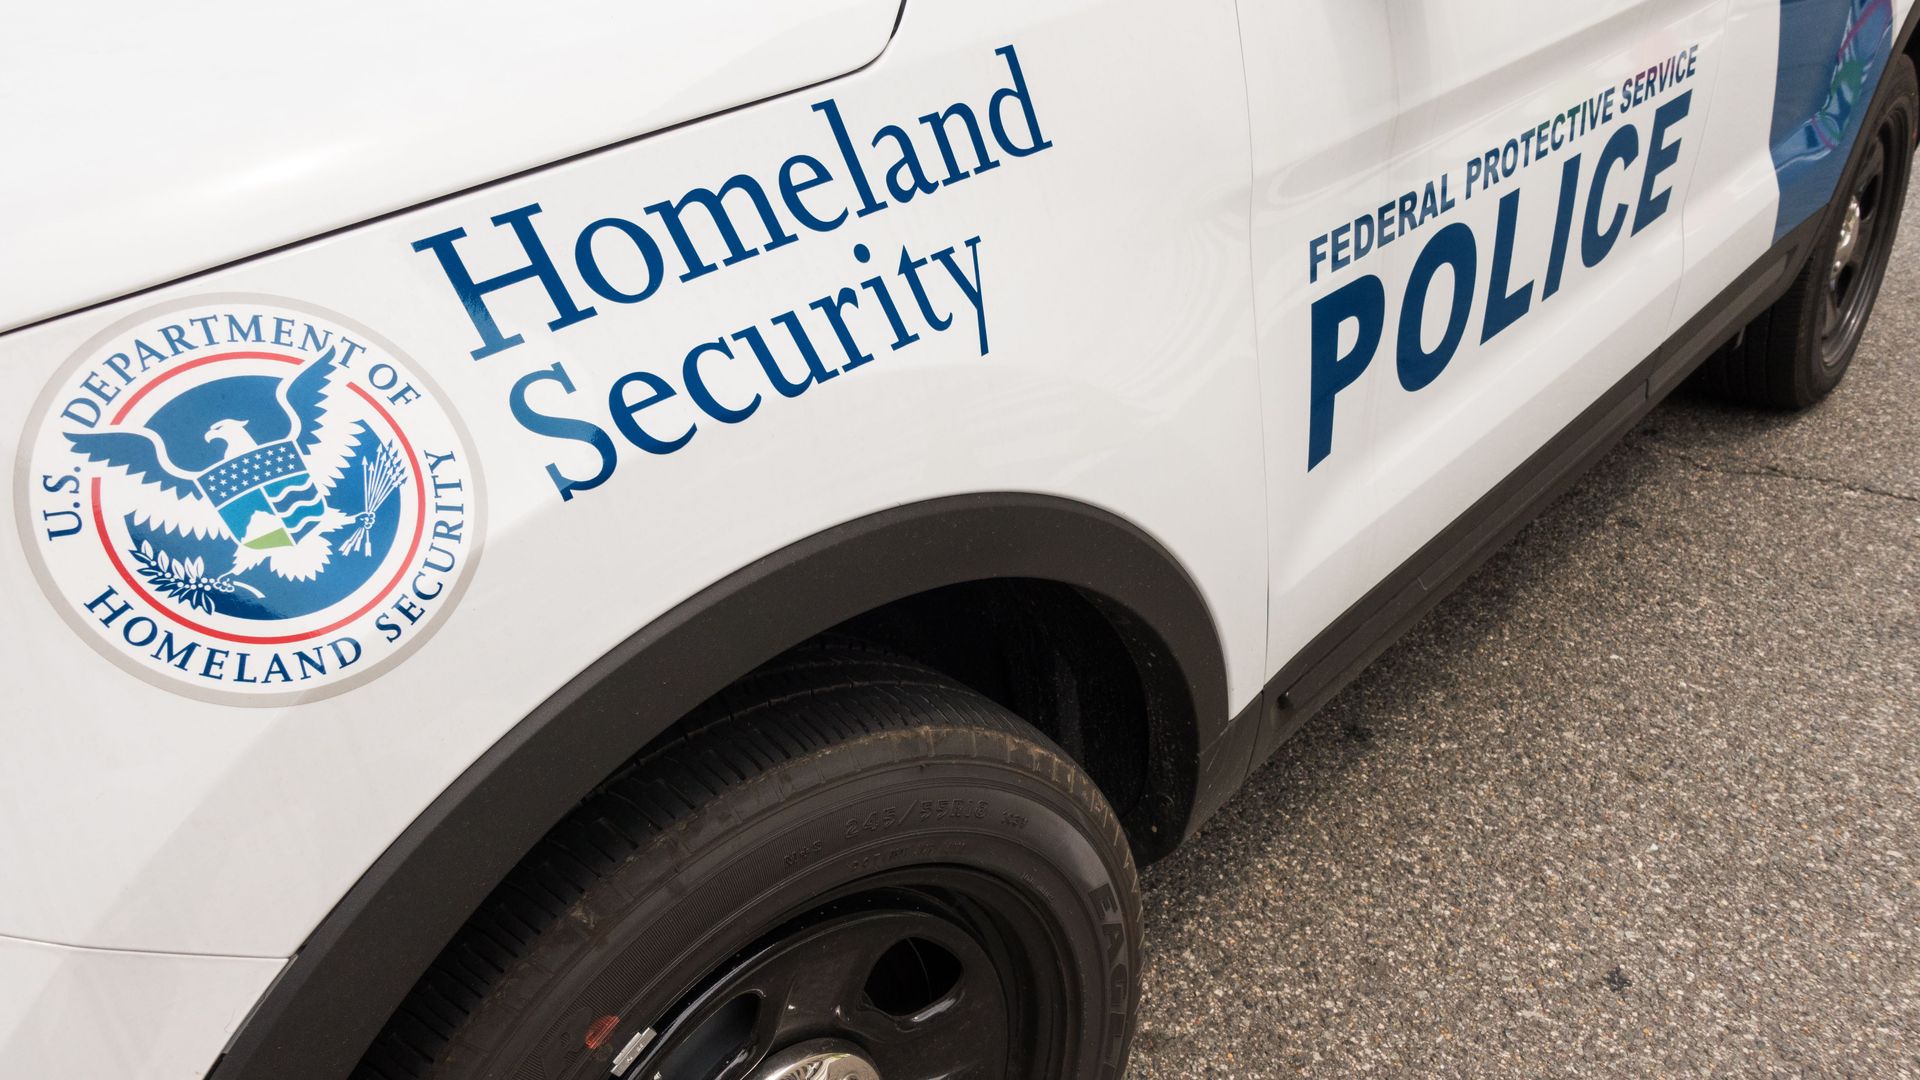 Photo of a Homeland Security protective patrol vehicle 